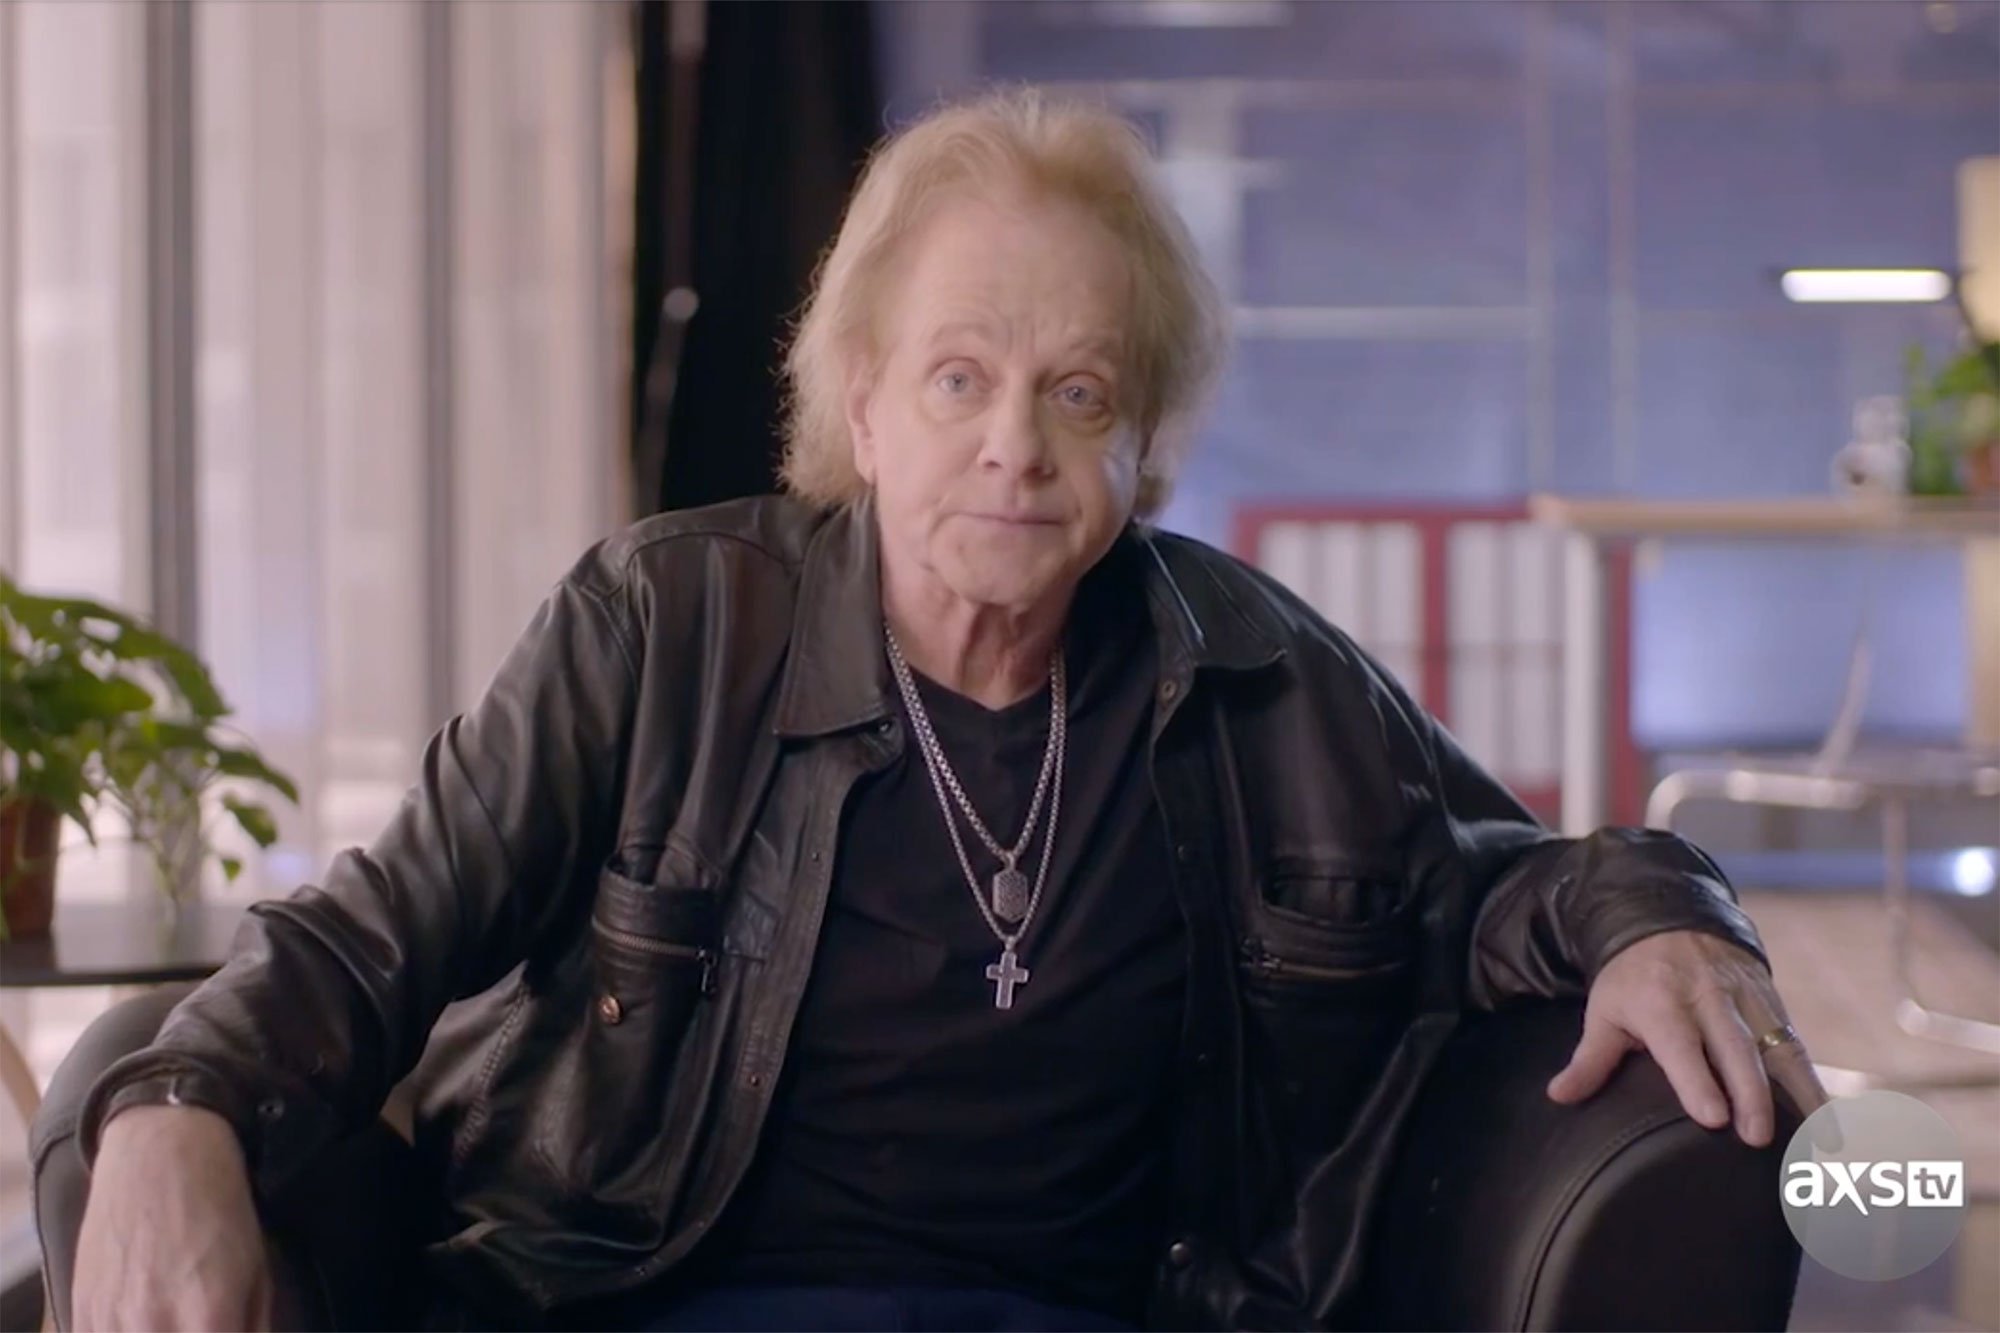 eddie money diagnosed with cancer